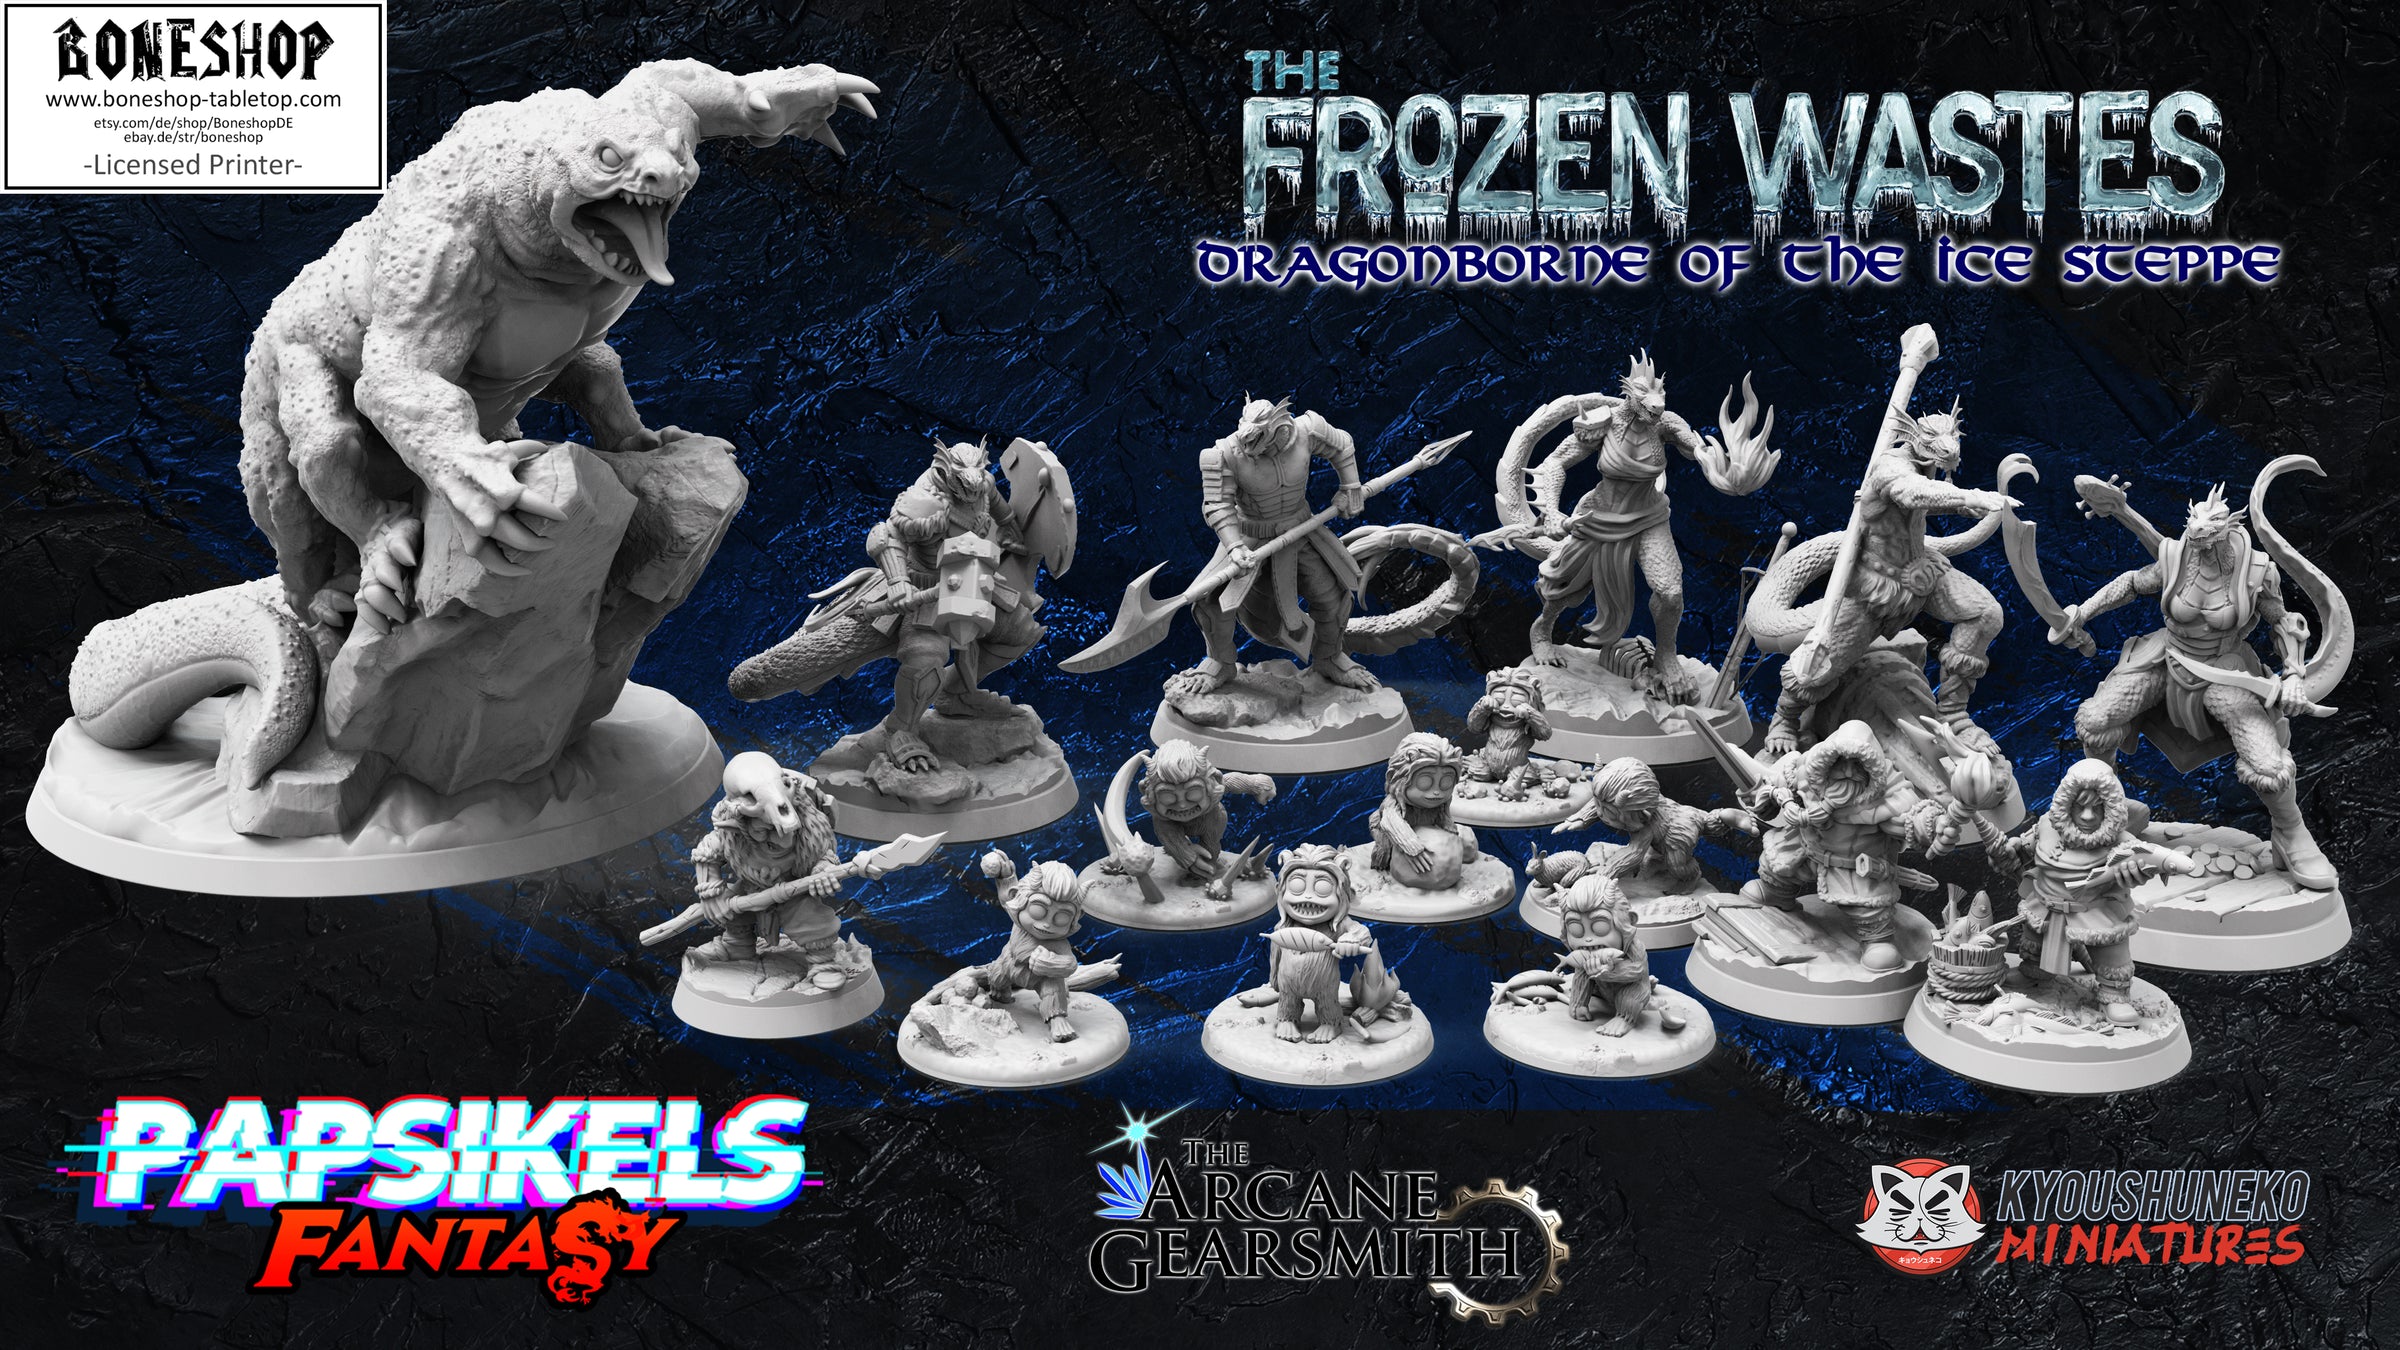 The Frozen Wastes - Dragonborne Of The Ice Steppe